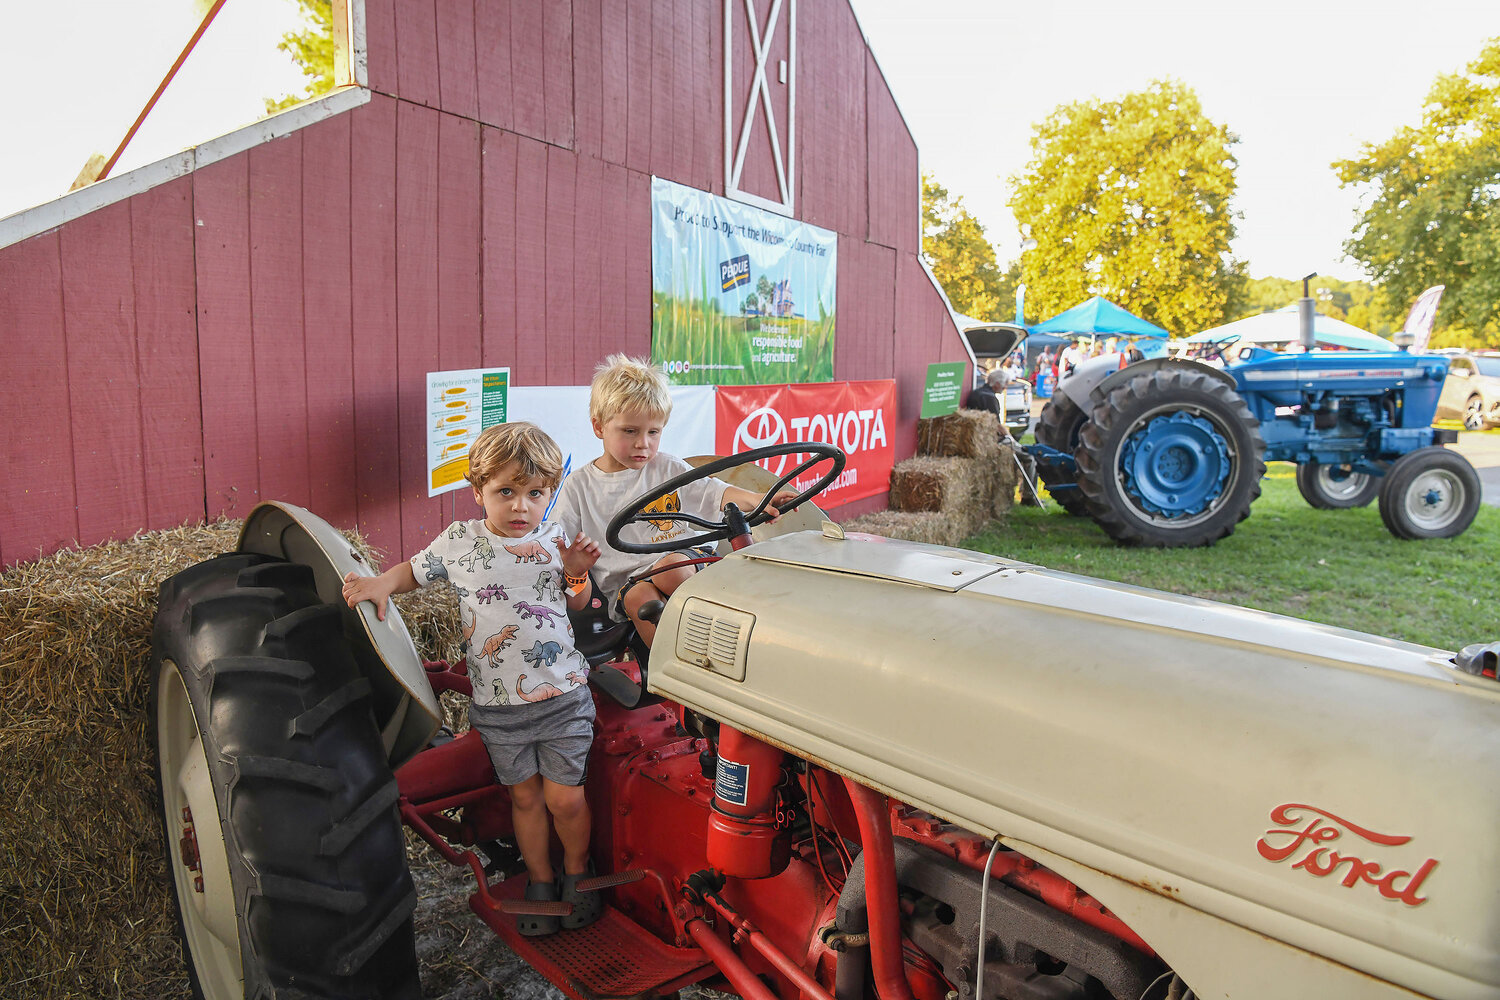 Dawson Cronshaw, 2, gets off a tractor as his brother, Daxton Cronshaw, 5, steers it during the annual Wicomico County Fair, held over the weekend at WinterPlace Park in Salisbury.